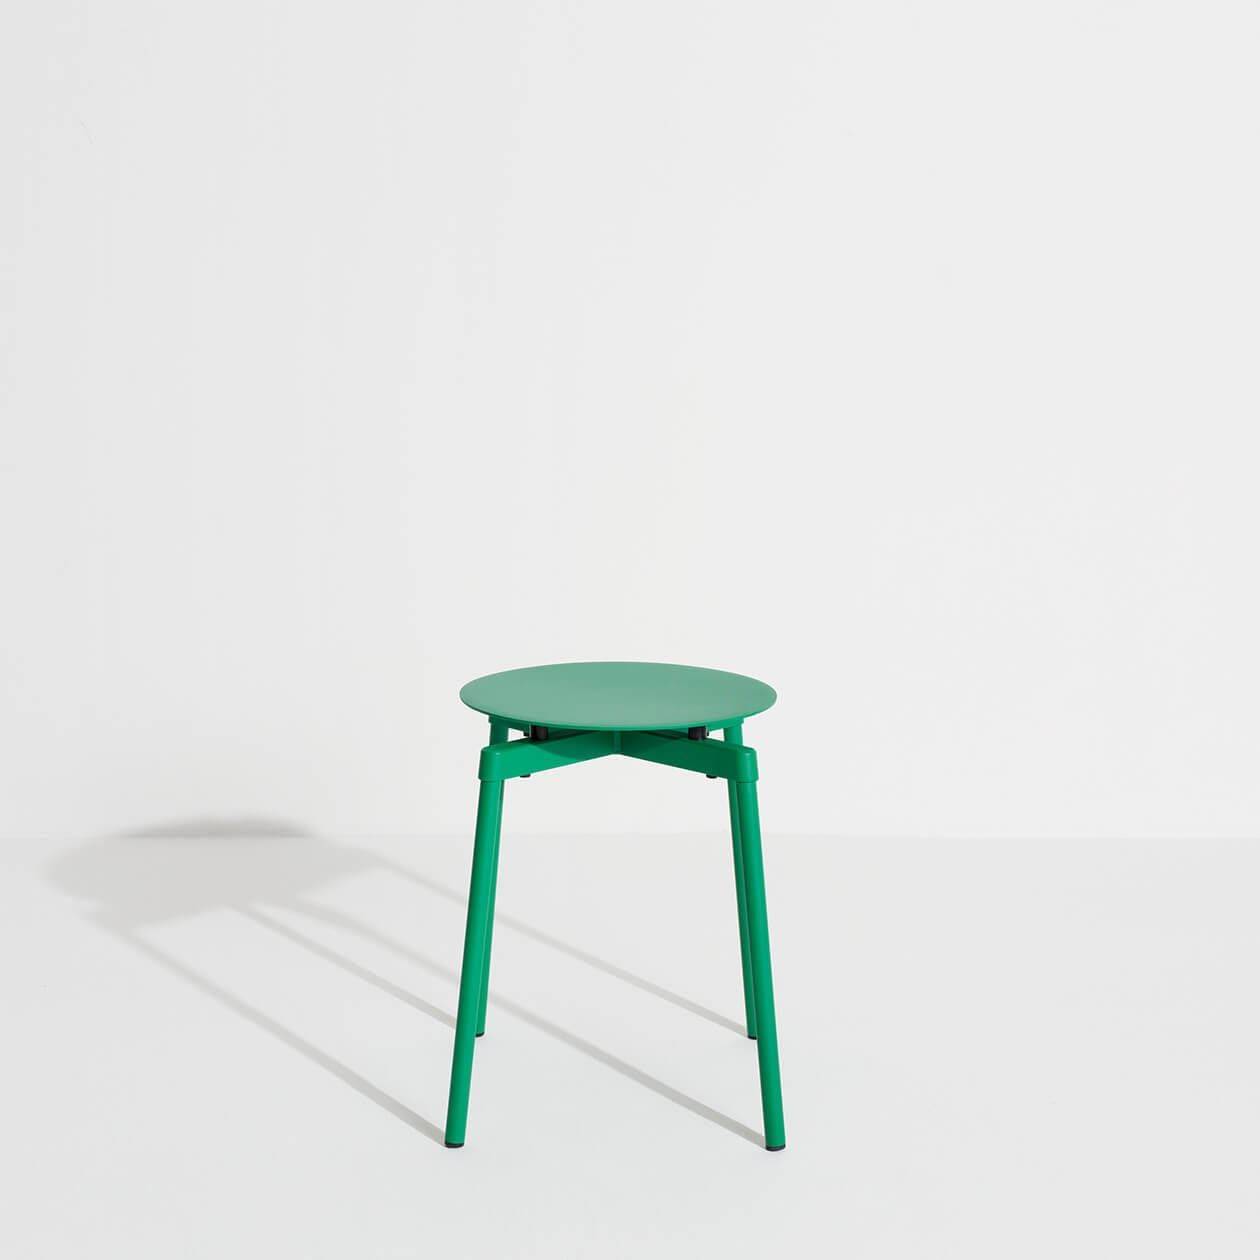 Fromme Stool - Mint green